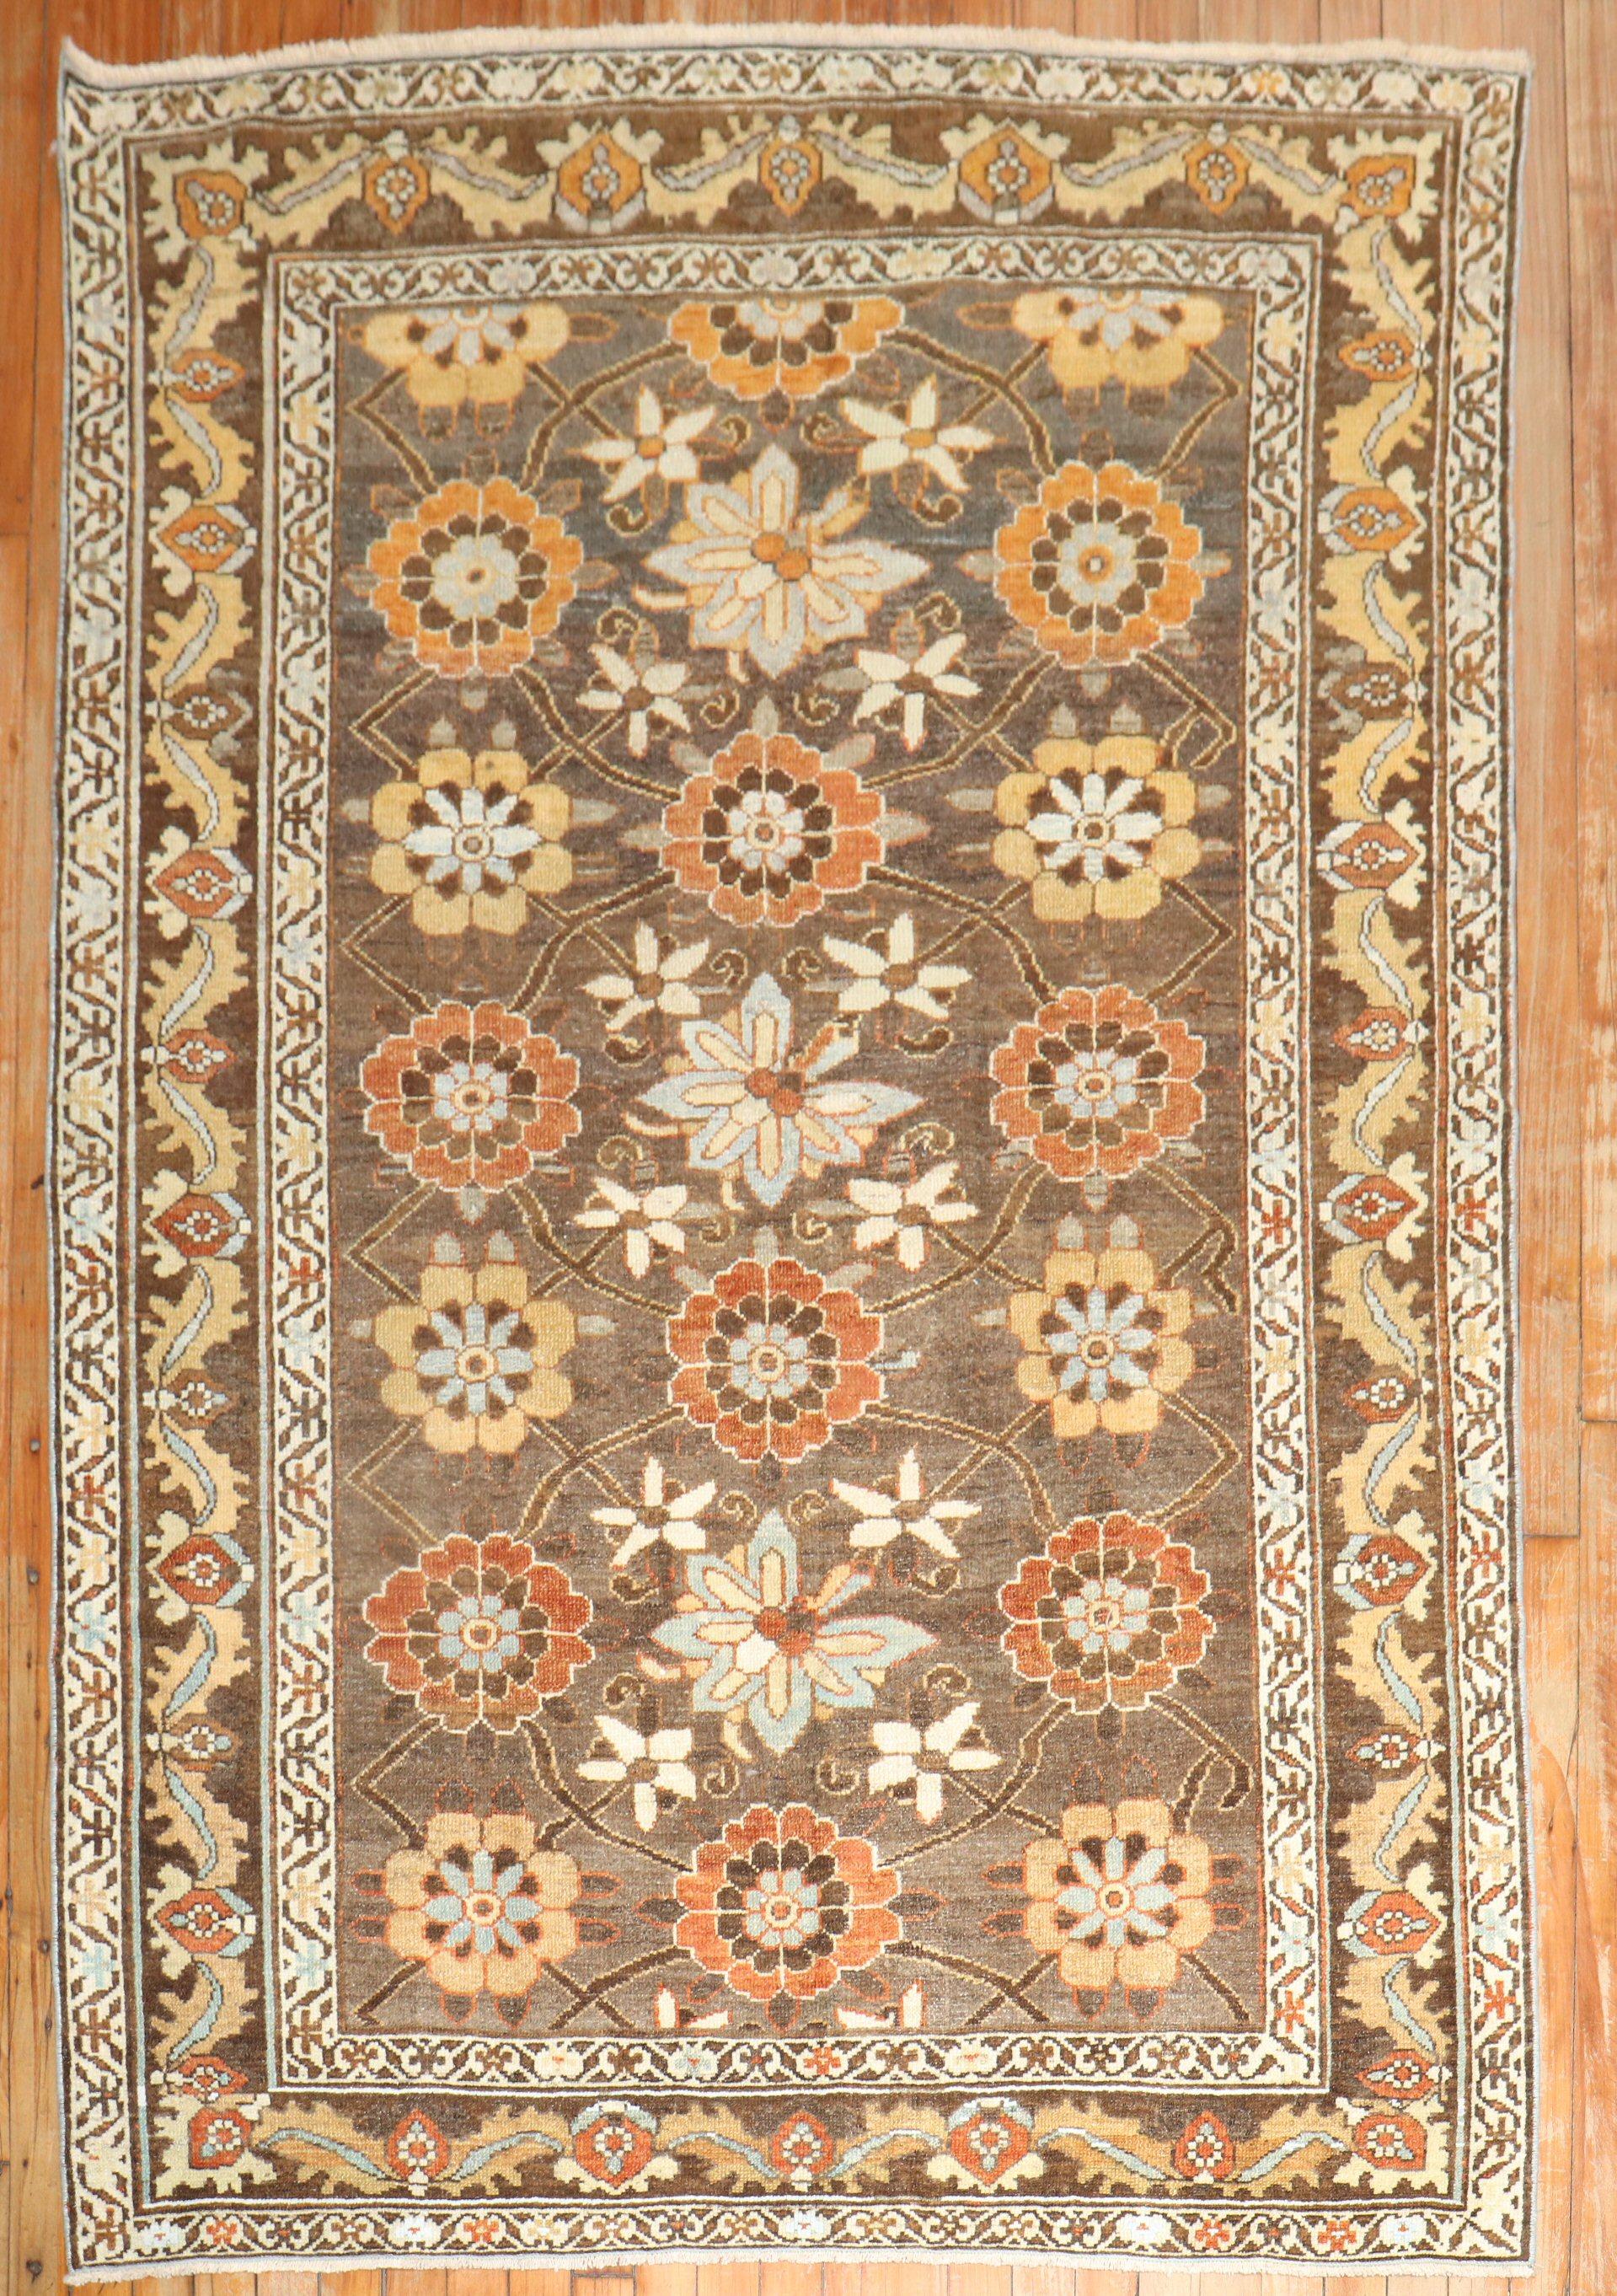 An accent size early 20th century Persian Veramin rug in predominantly brown

Measures: 4'6